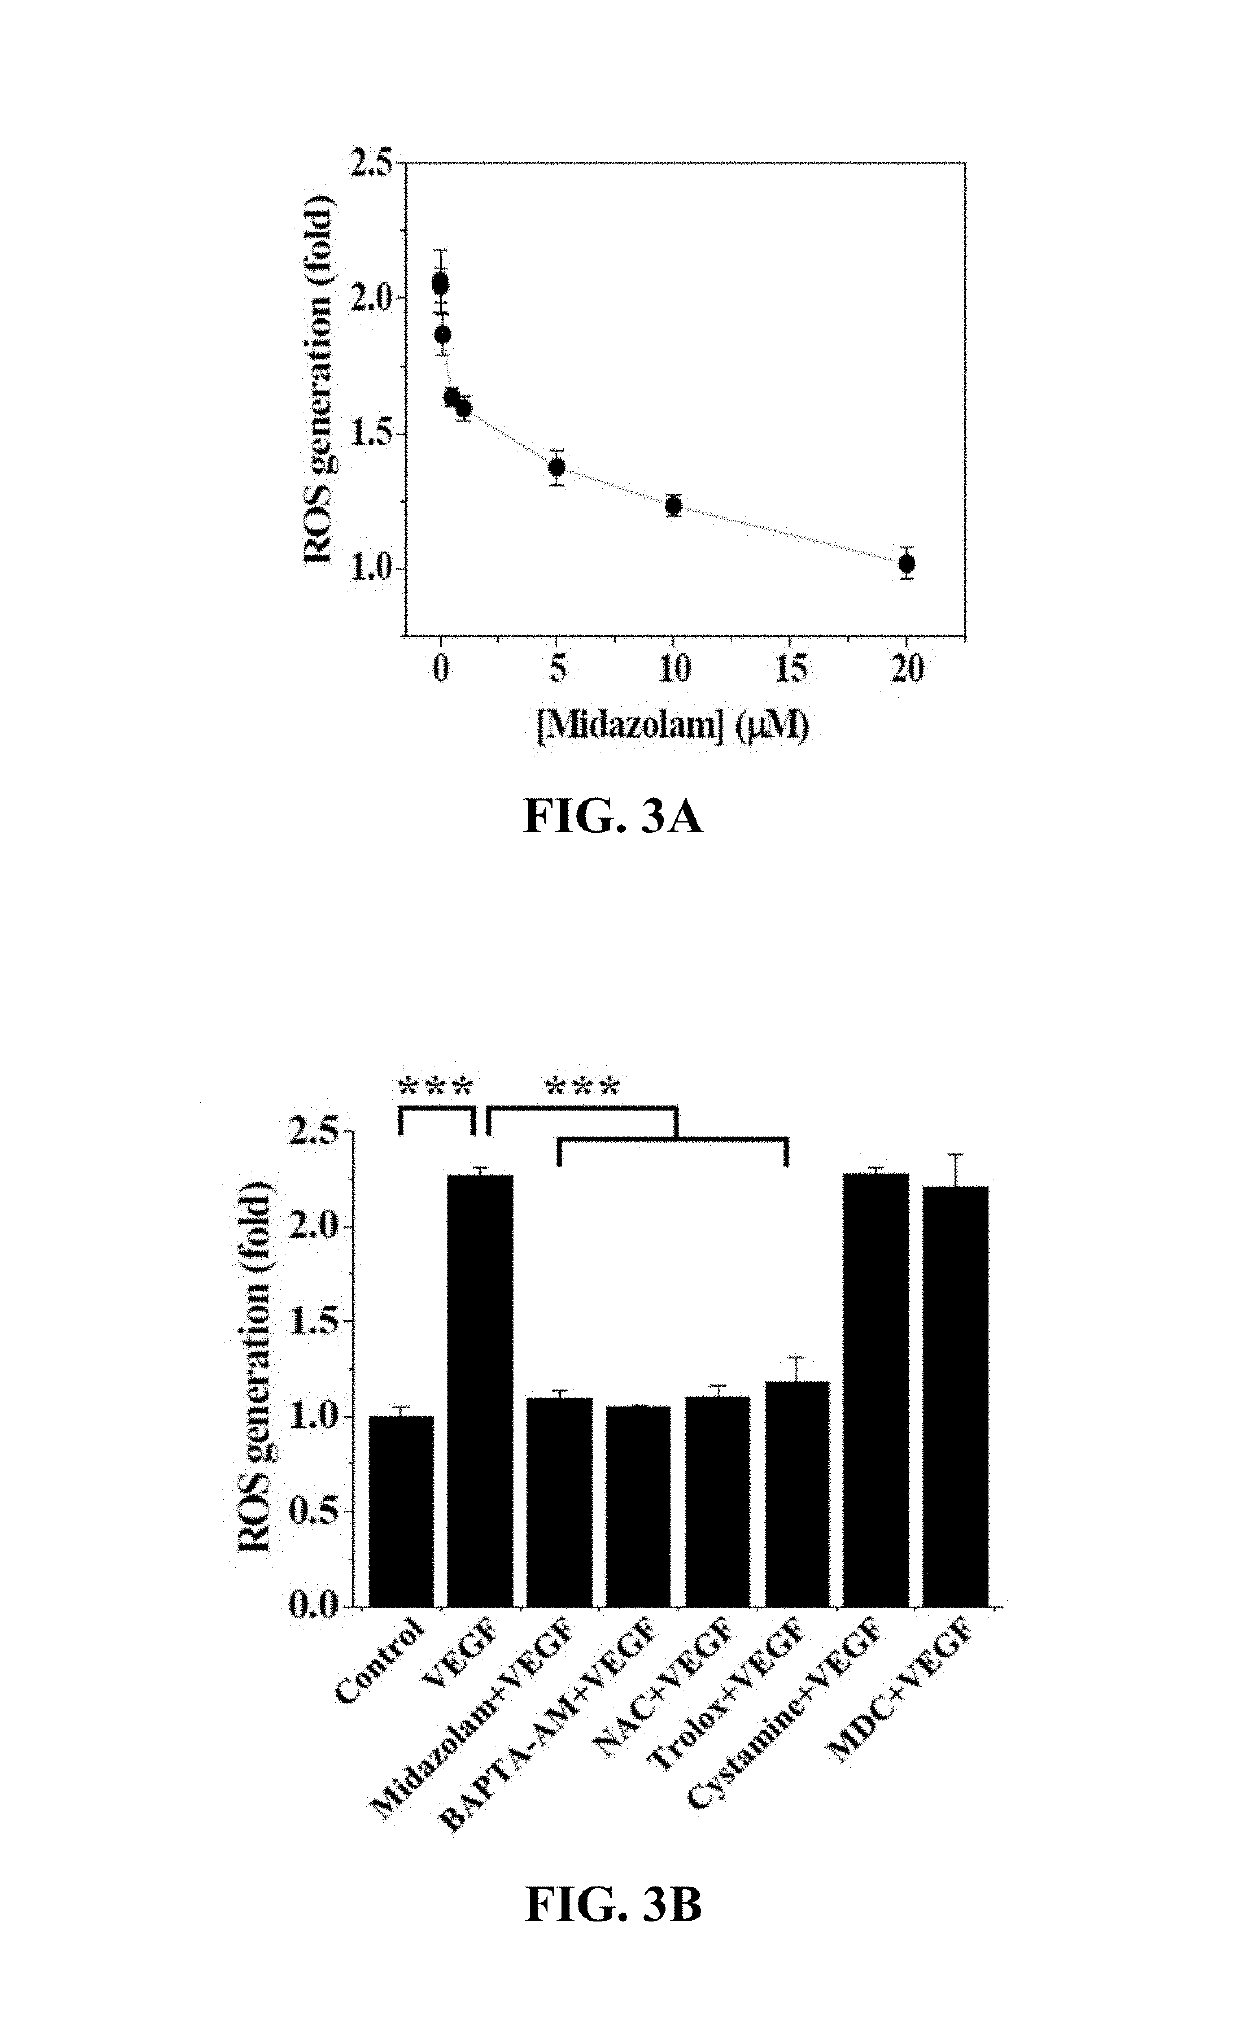 Method for prevention or treatment of diabetic complications